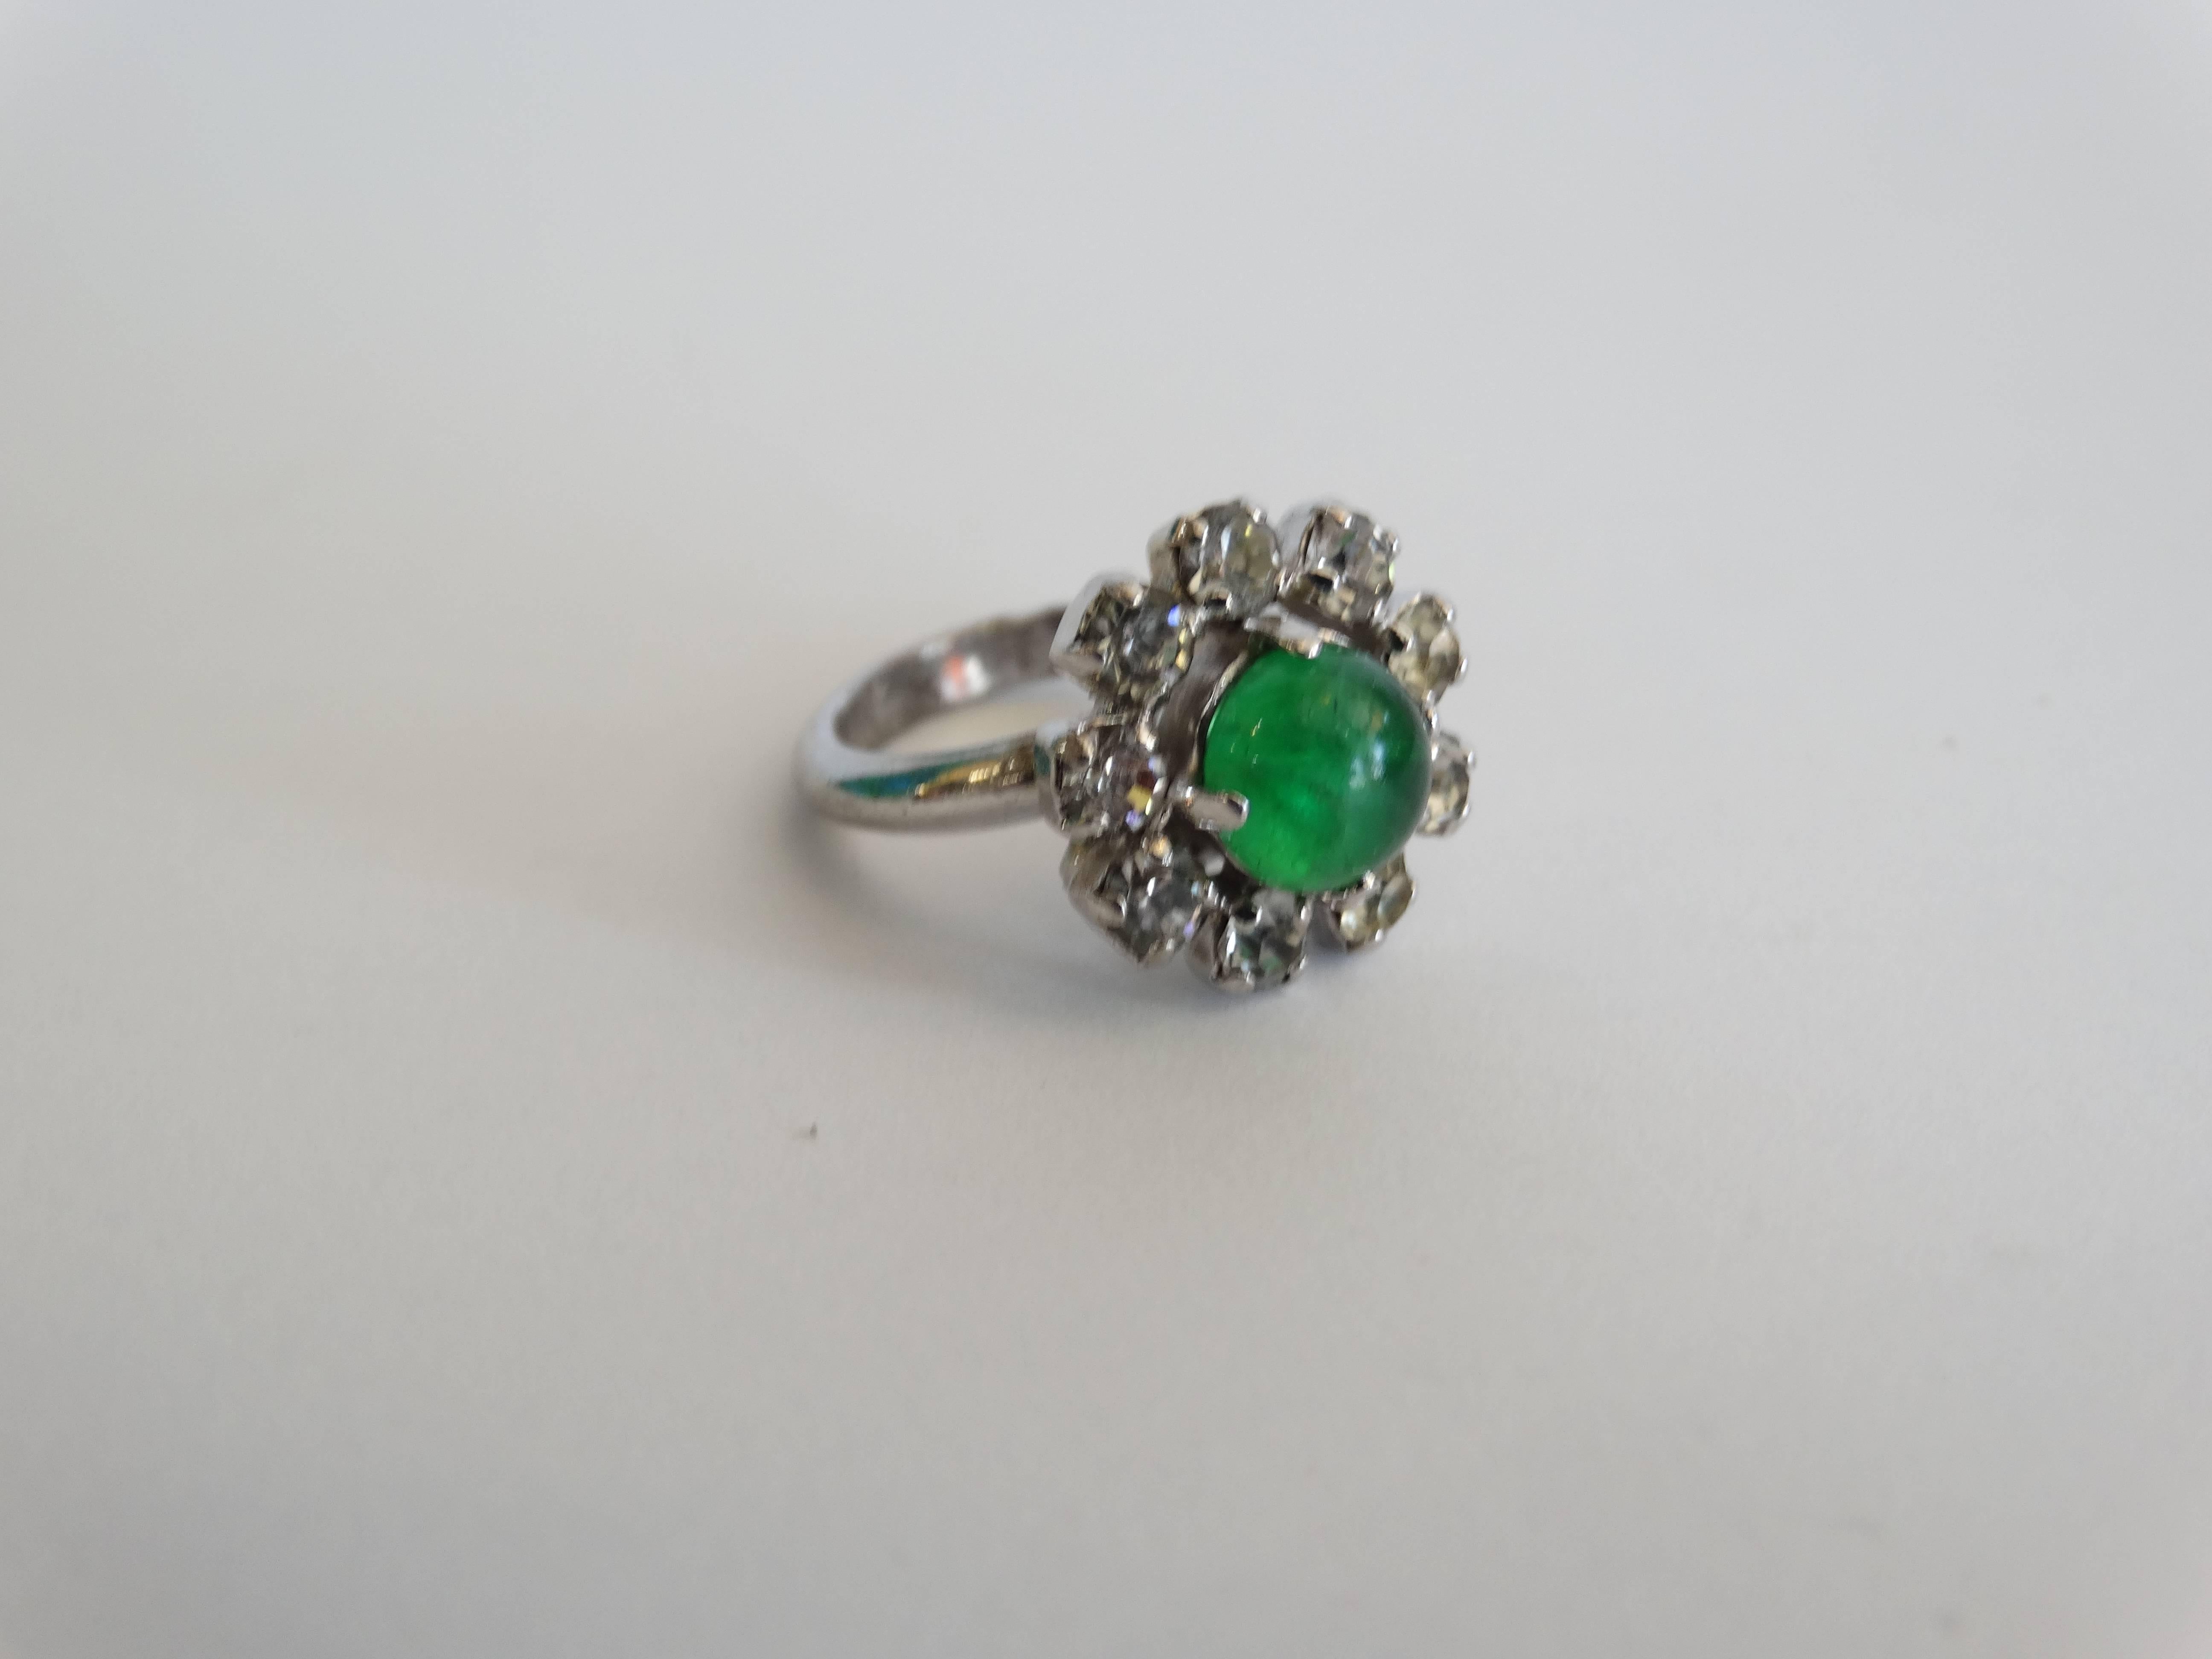 A beautiful cocktail ring designed for Christian Dior by Henkel and Grosse! Diamante and Emerald ring features 9 settings of diamanté and one glass emerald center stone.  signed Chr Dior, C, Germany, 1969 Reference: Mark dates this to 1969, and